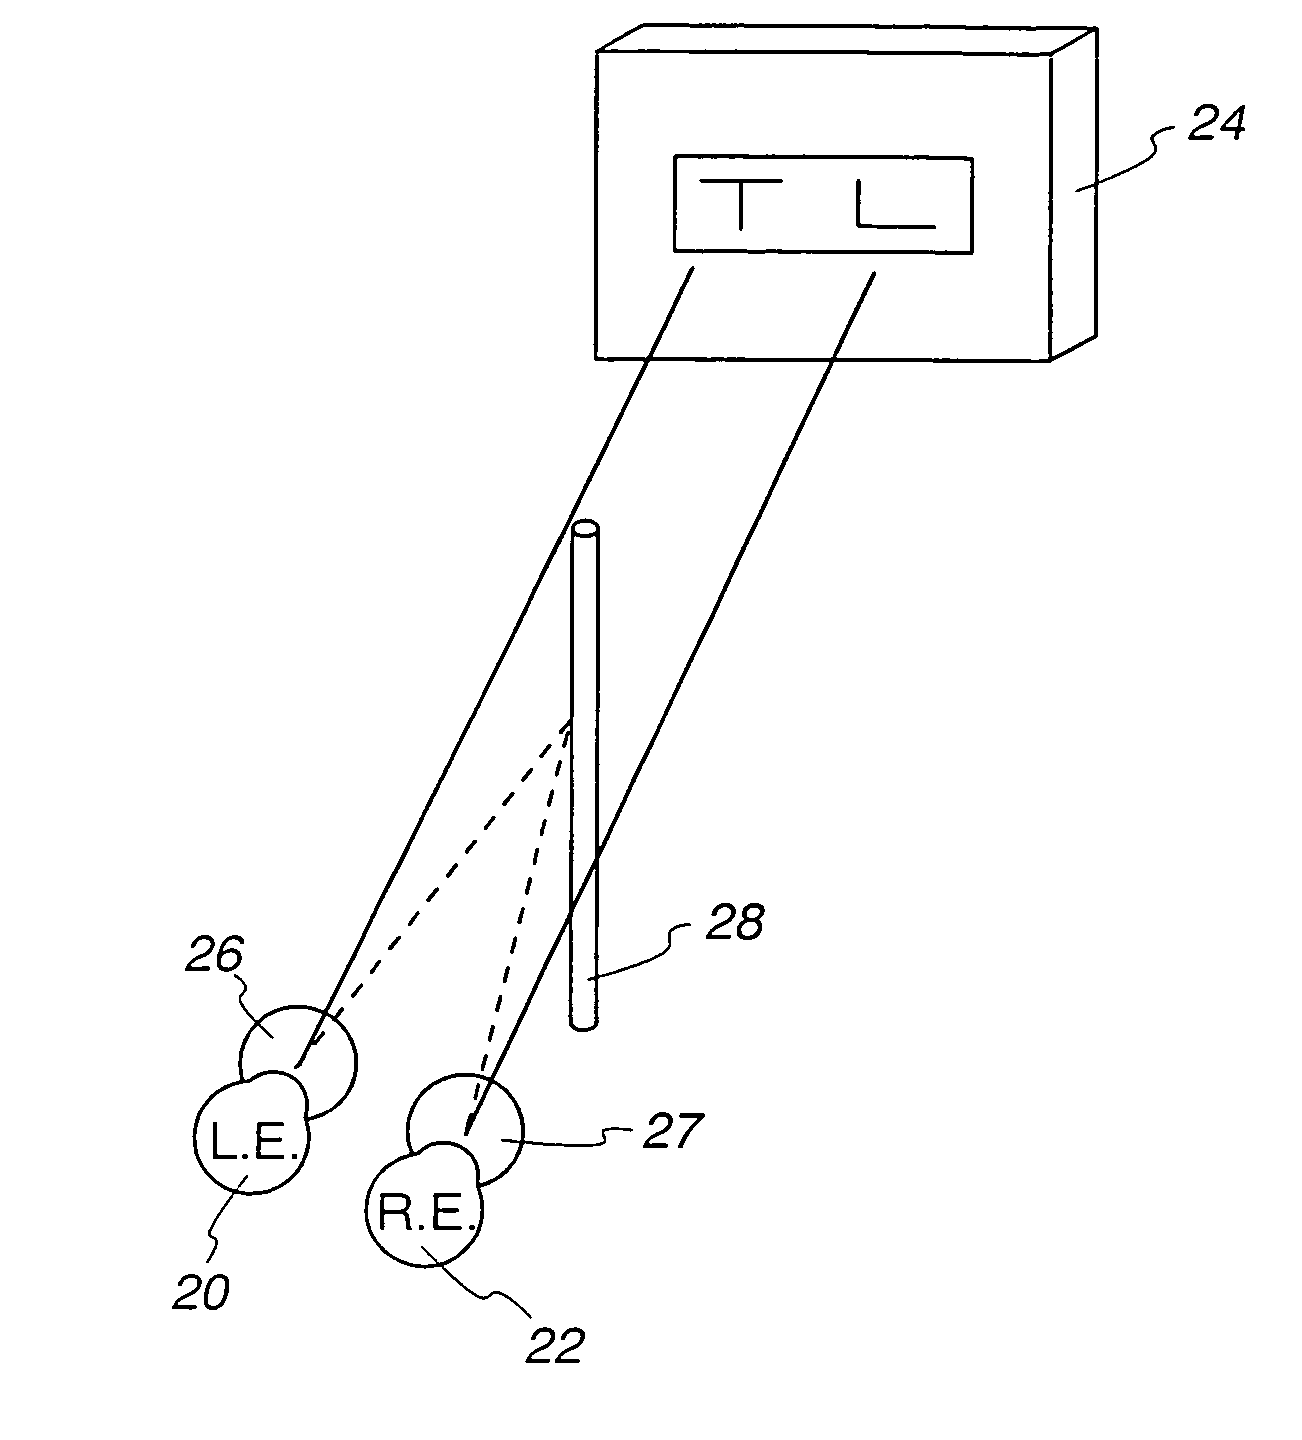 System and method for measuring fixation disparity and proprioceptive misalignment of the visual system